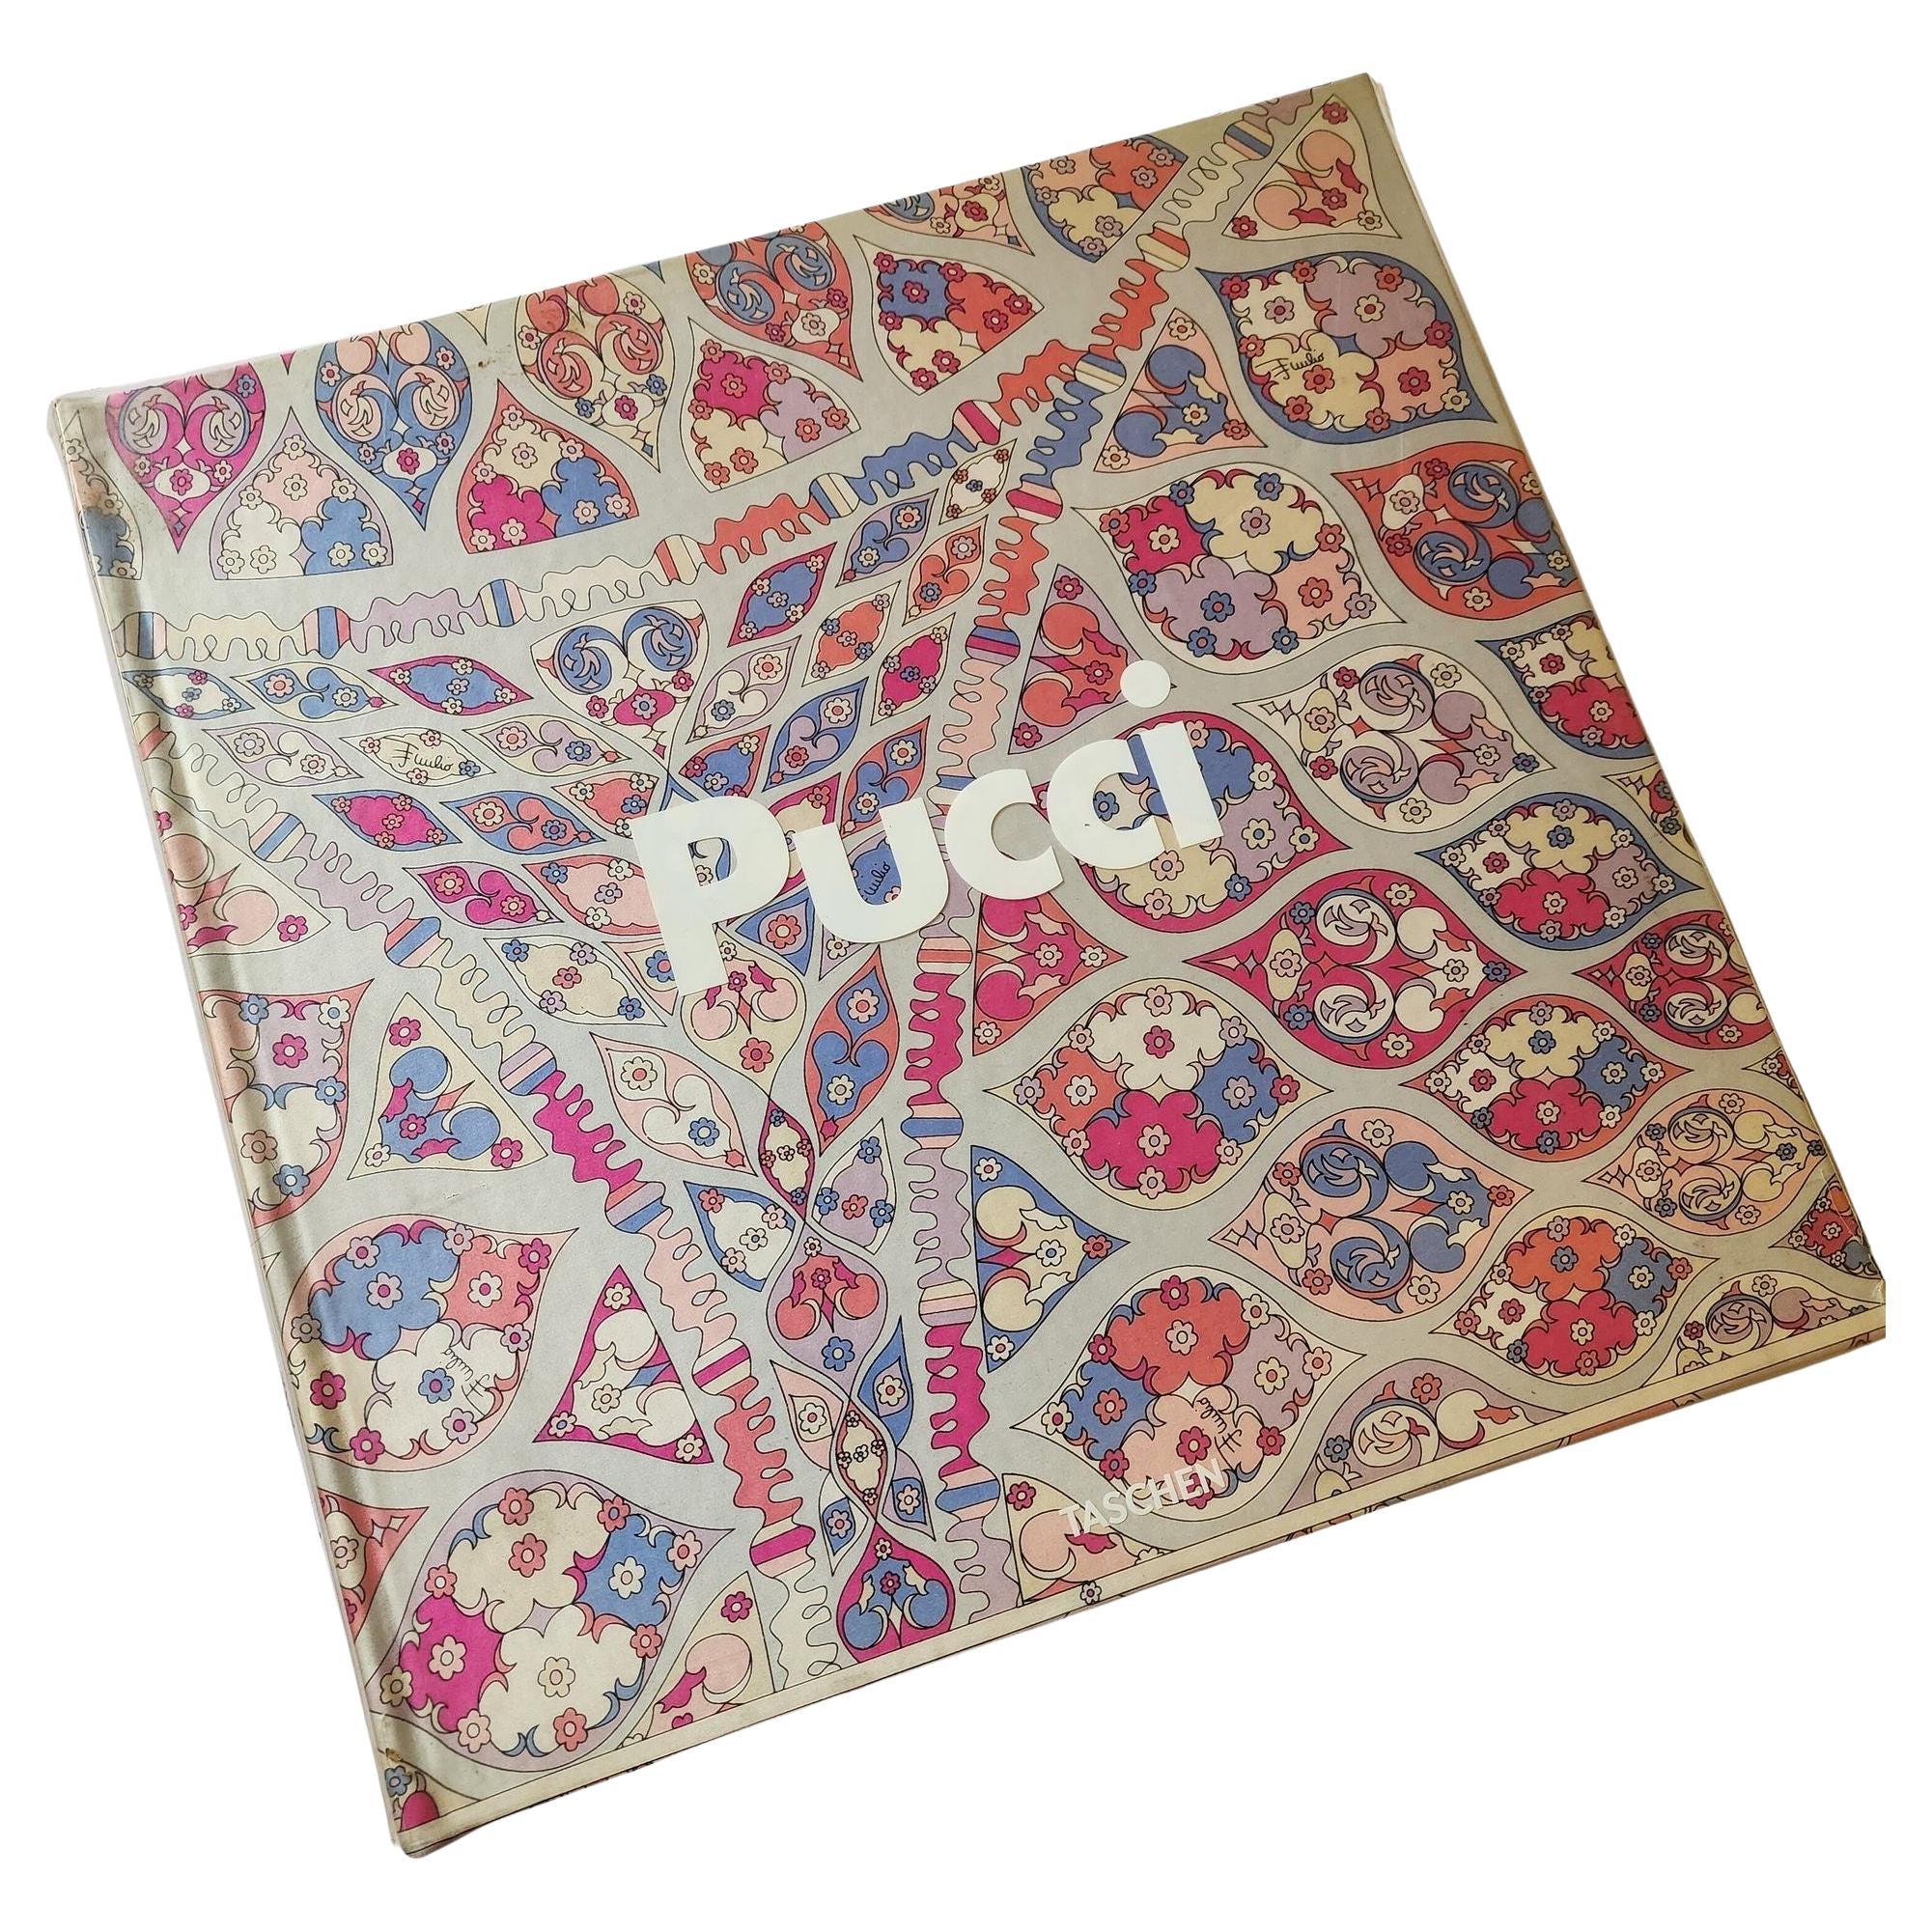 Emilio Pucci - Fashion Story -Limited Edition Taschen 2010 For Sale